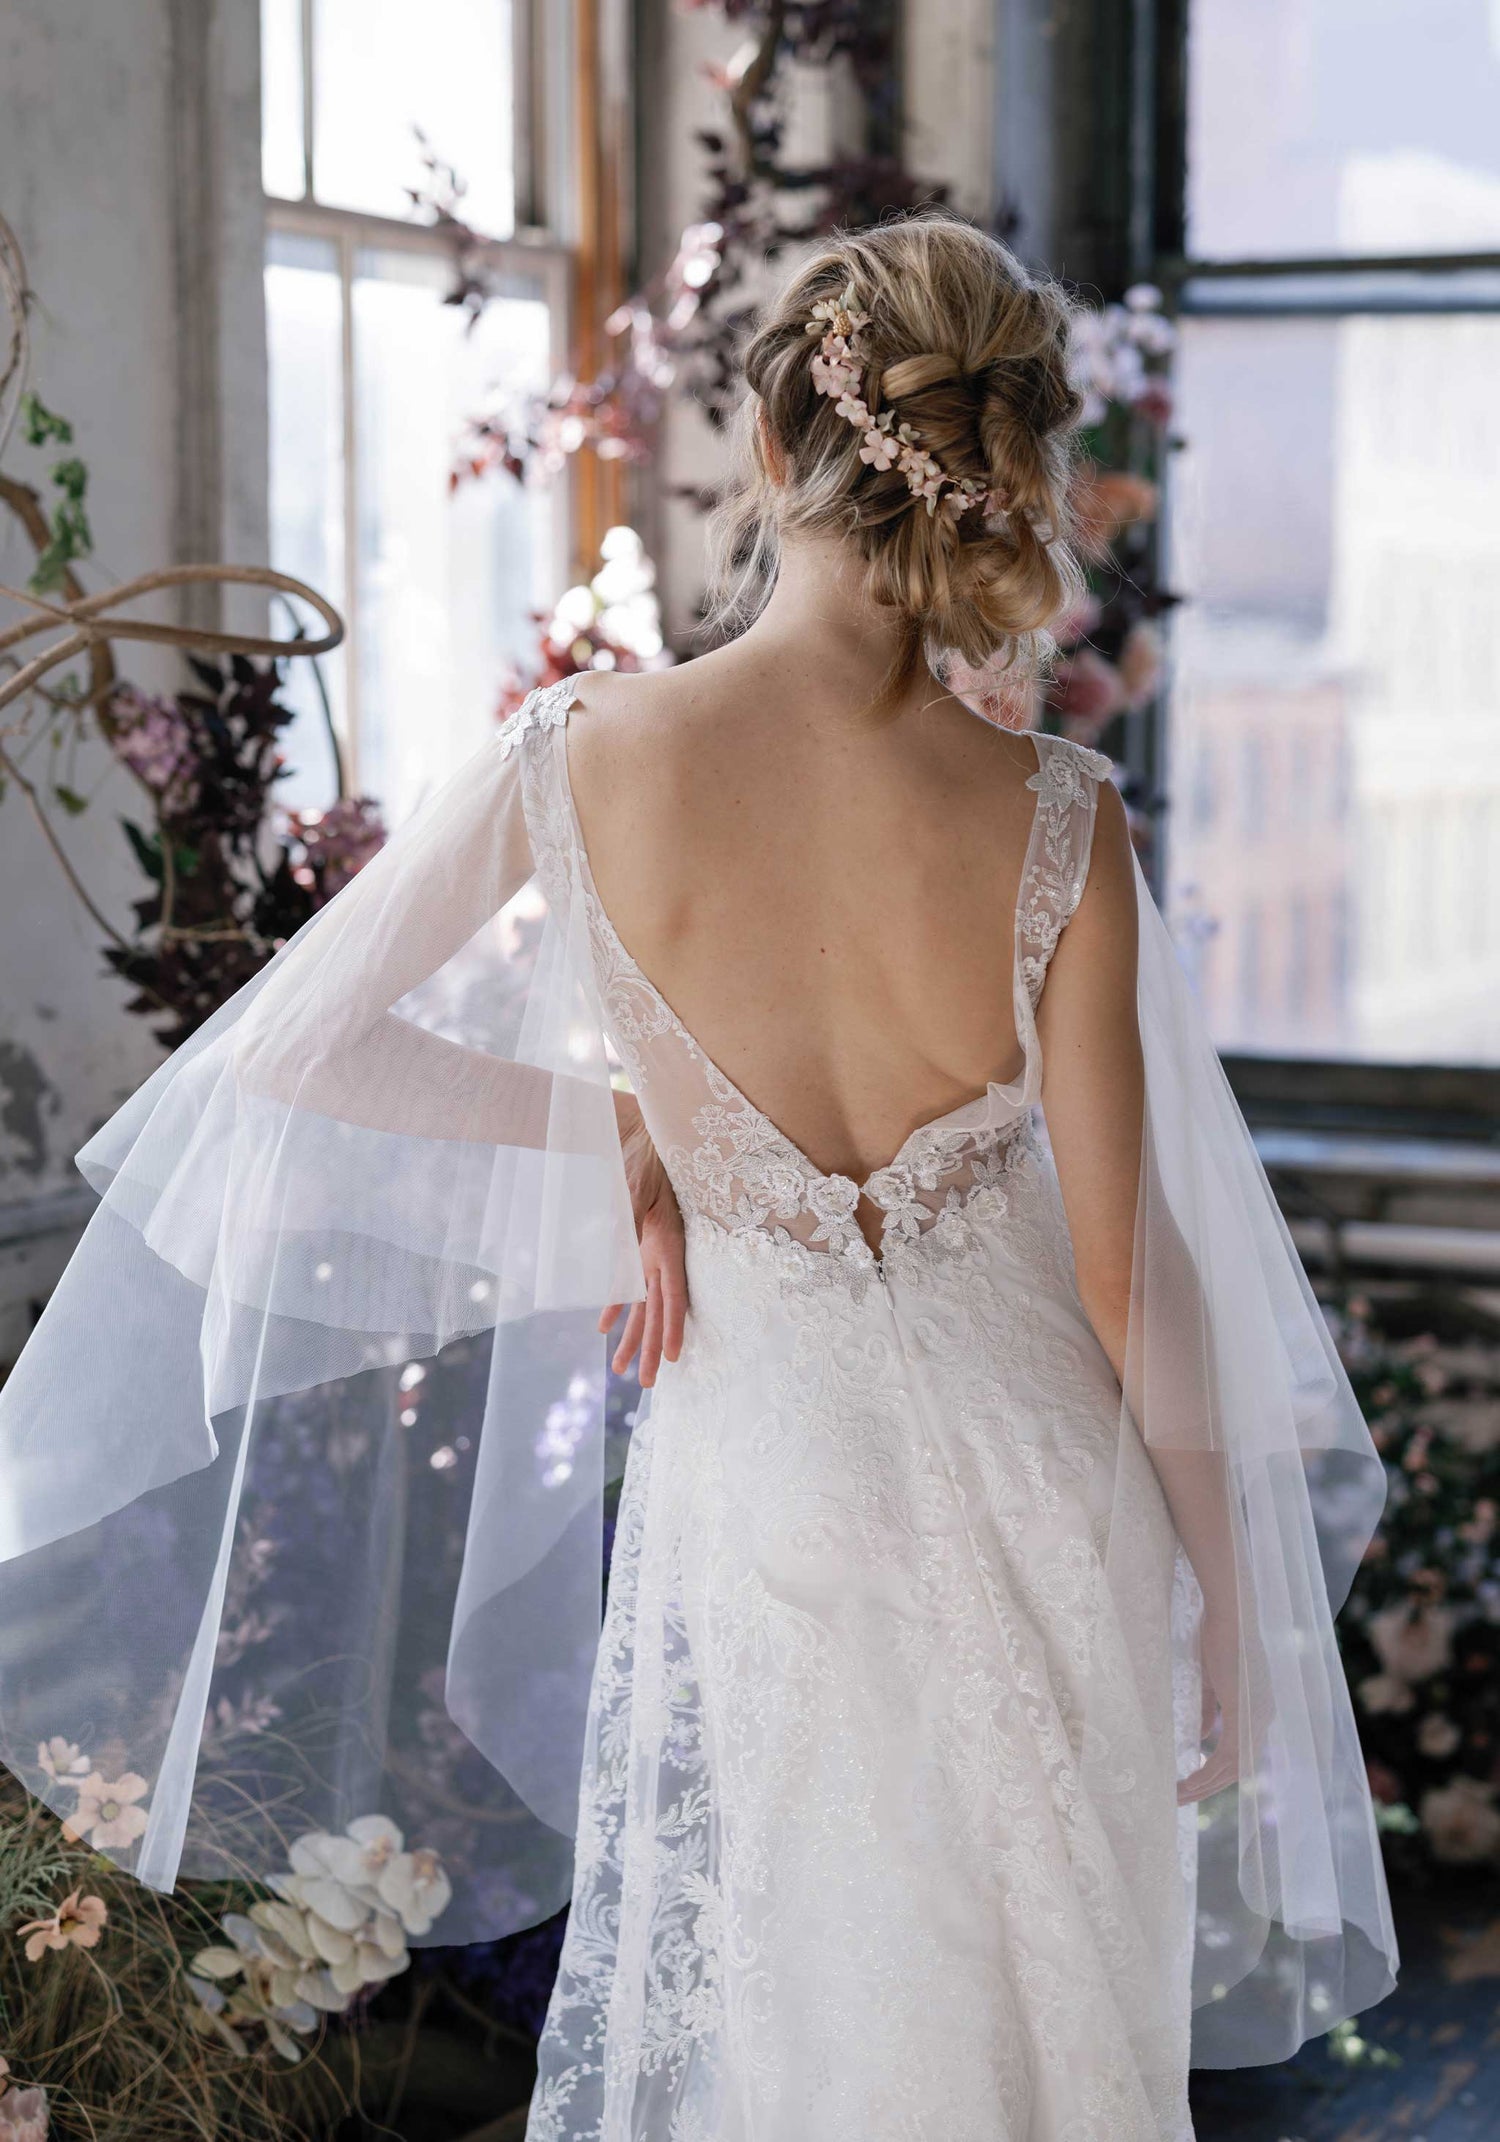 Crystal Iridescent Embroidered Floral Wedding Dress Claire Pettibone